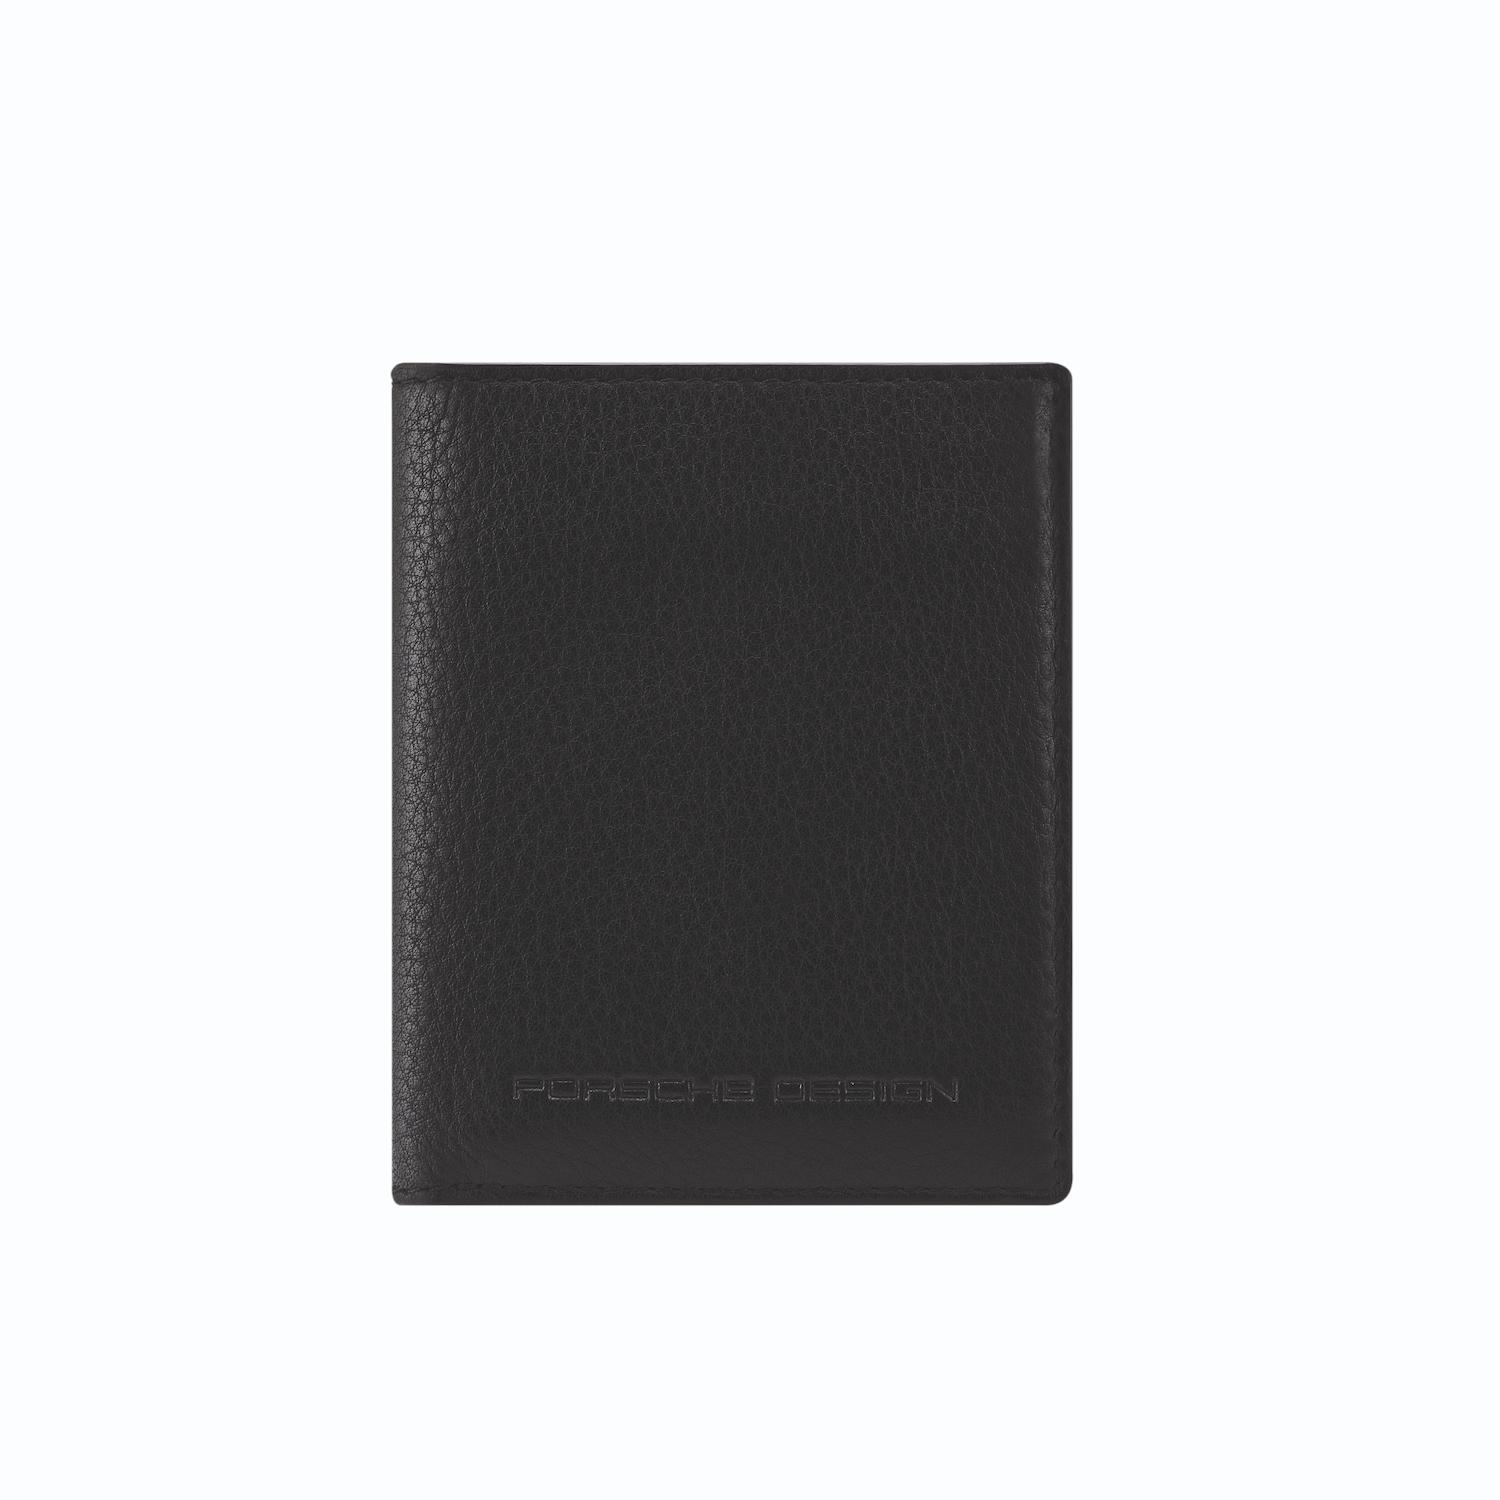 Pd Business Slg Billfold 6 CC by Brics (Color: Black)